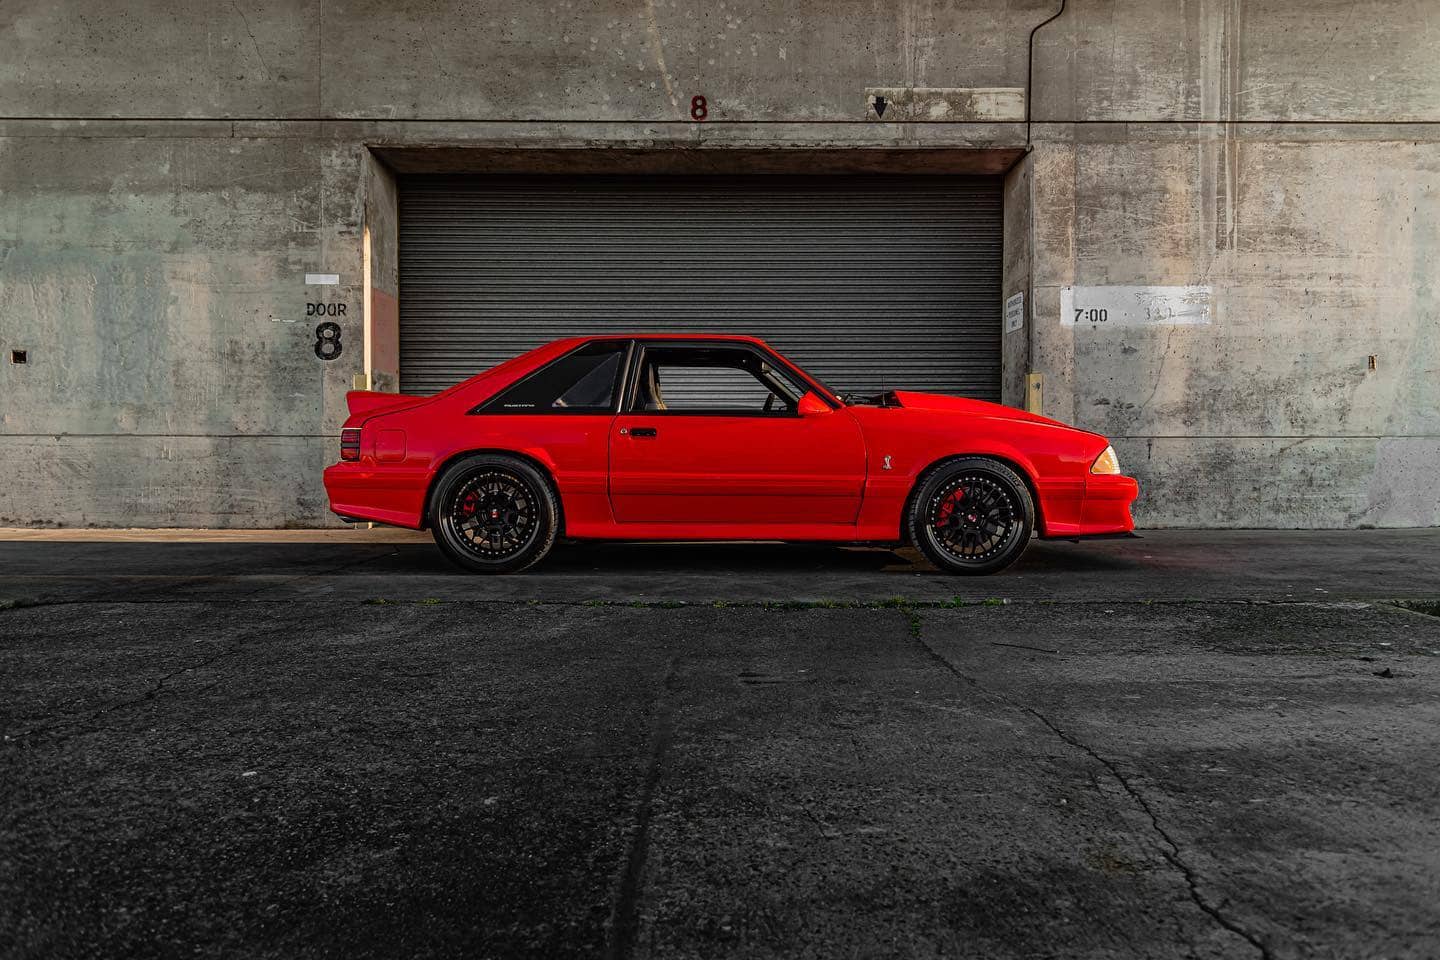 Modified Foxbody Mustang in vibrant red color